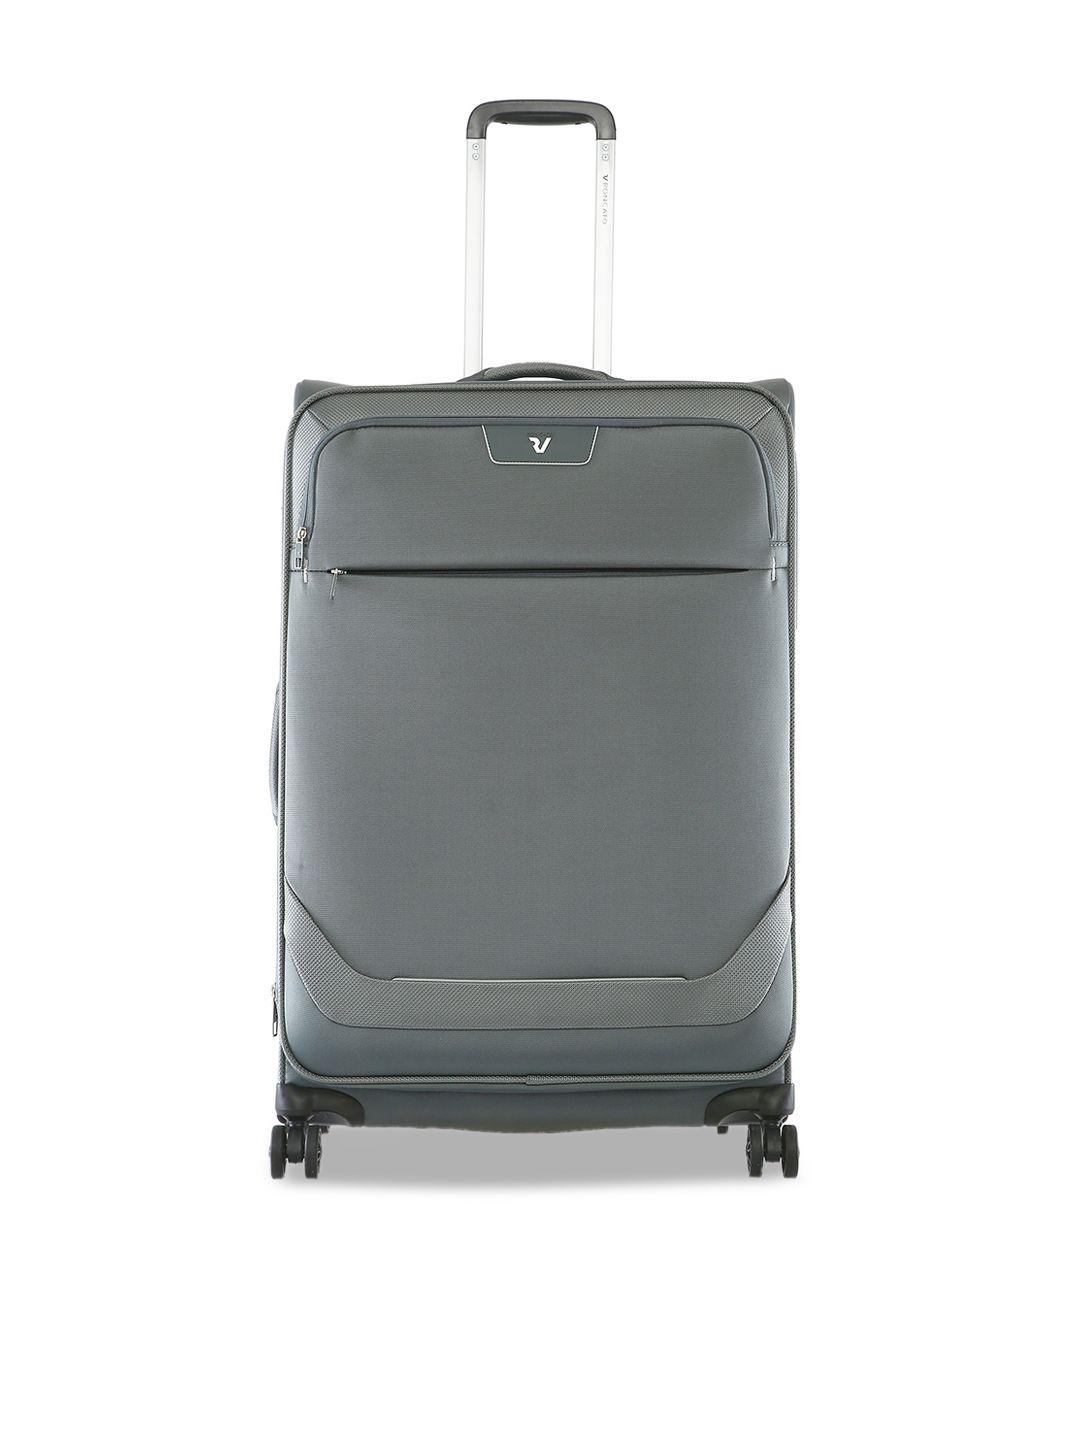 roncato textured soft-sided water resistant large trolley suitcase